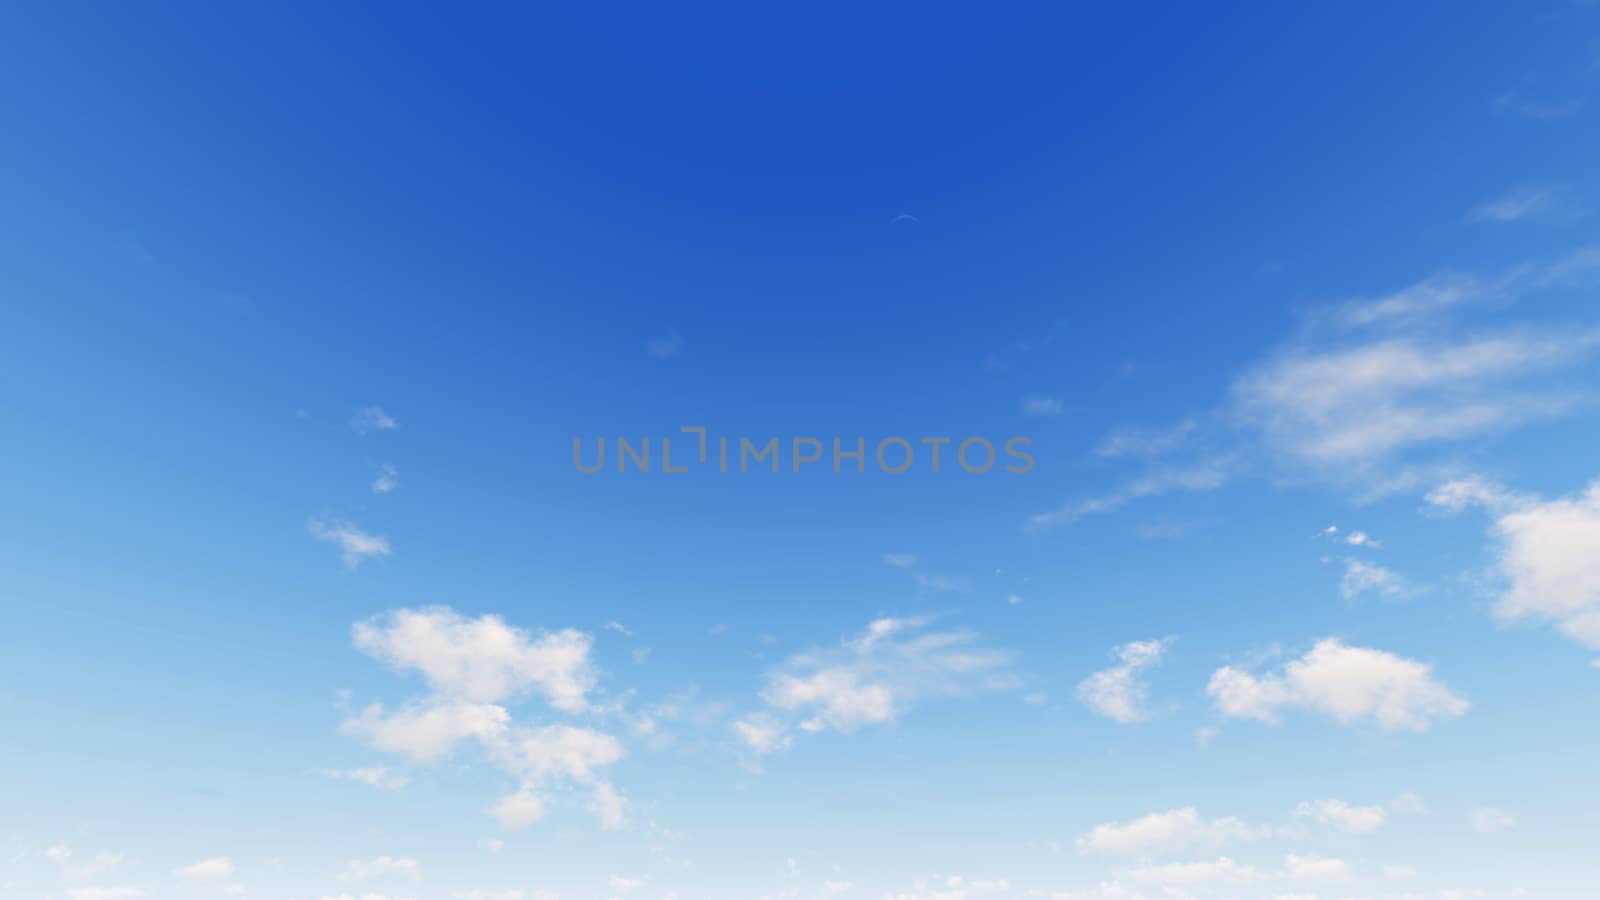 Cloudy blue sky abstract background, 3d illustration by teerawit